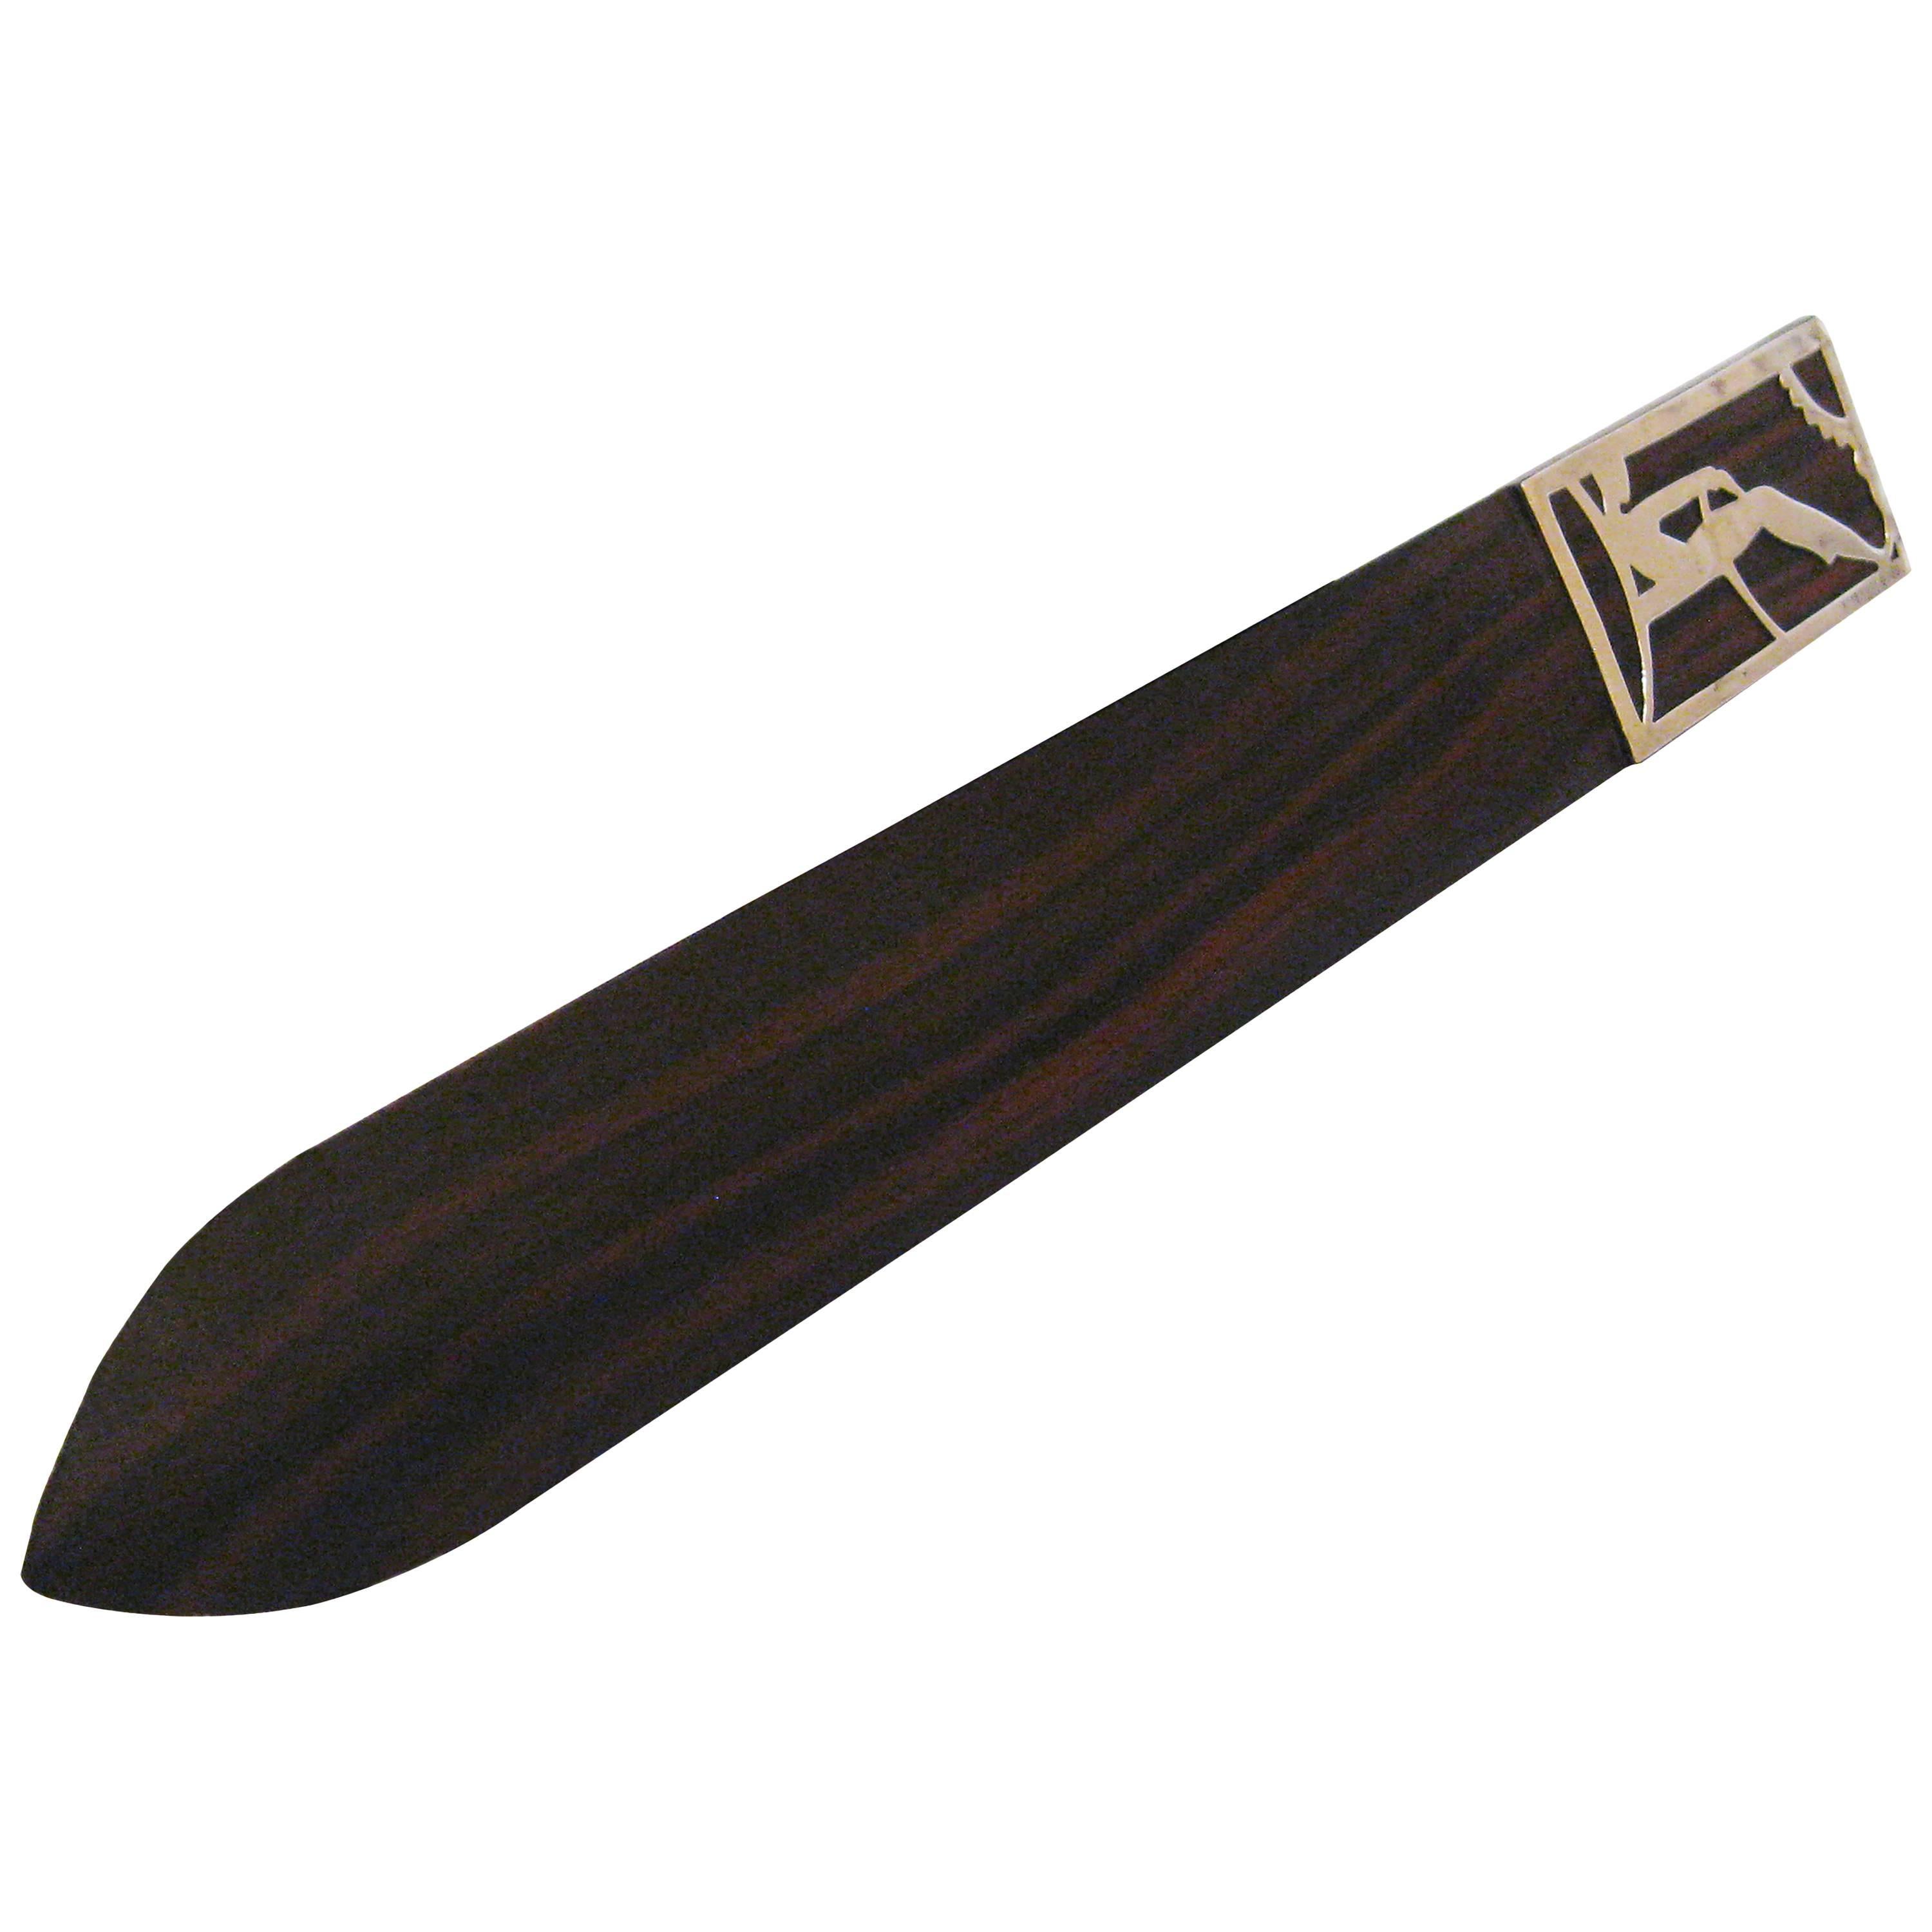 Ebony and Silver Letter Opener by WMF, circa 1930